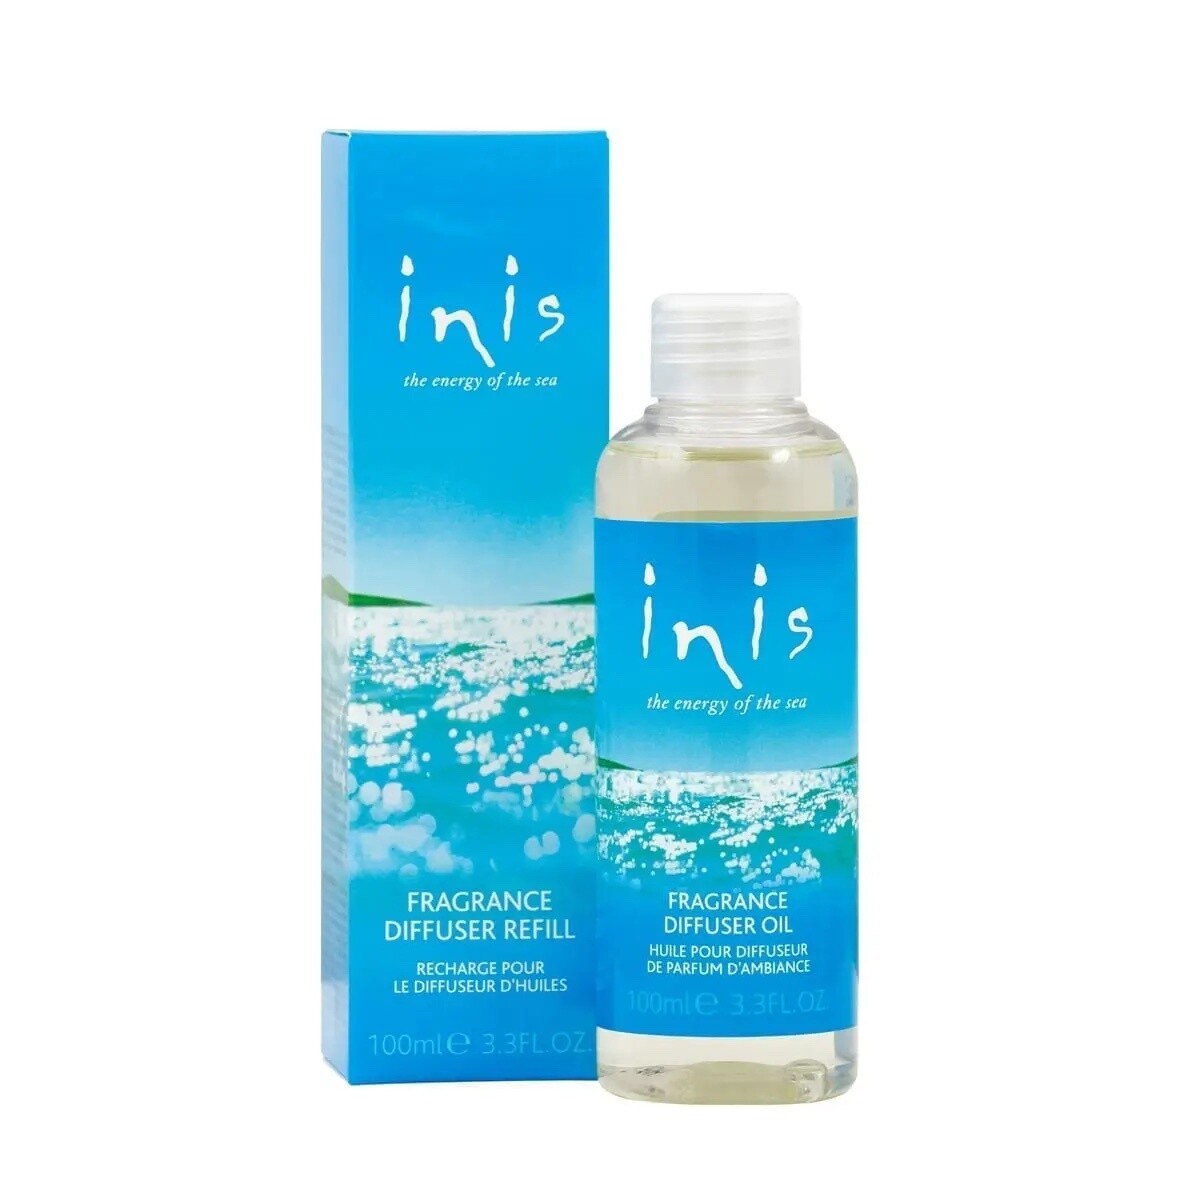 Inis Energy Of The Sea Fragrance Diffuser Refill 100ml / 3.3 fl oz.